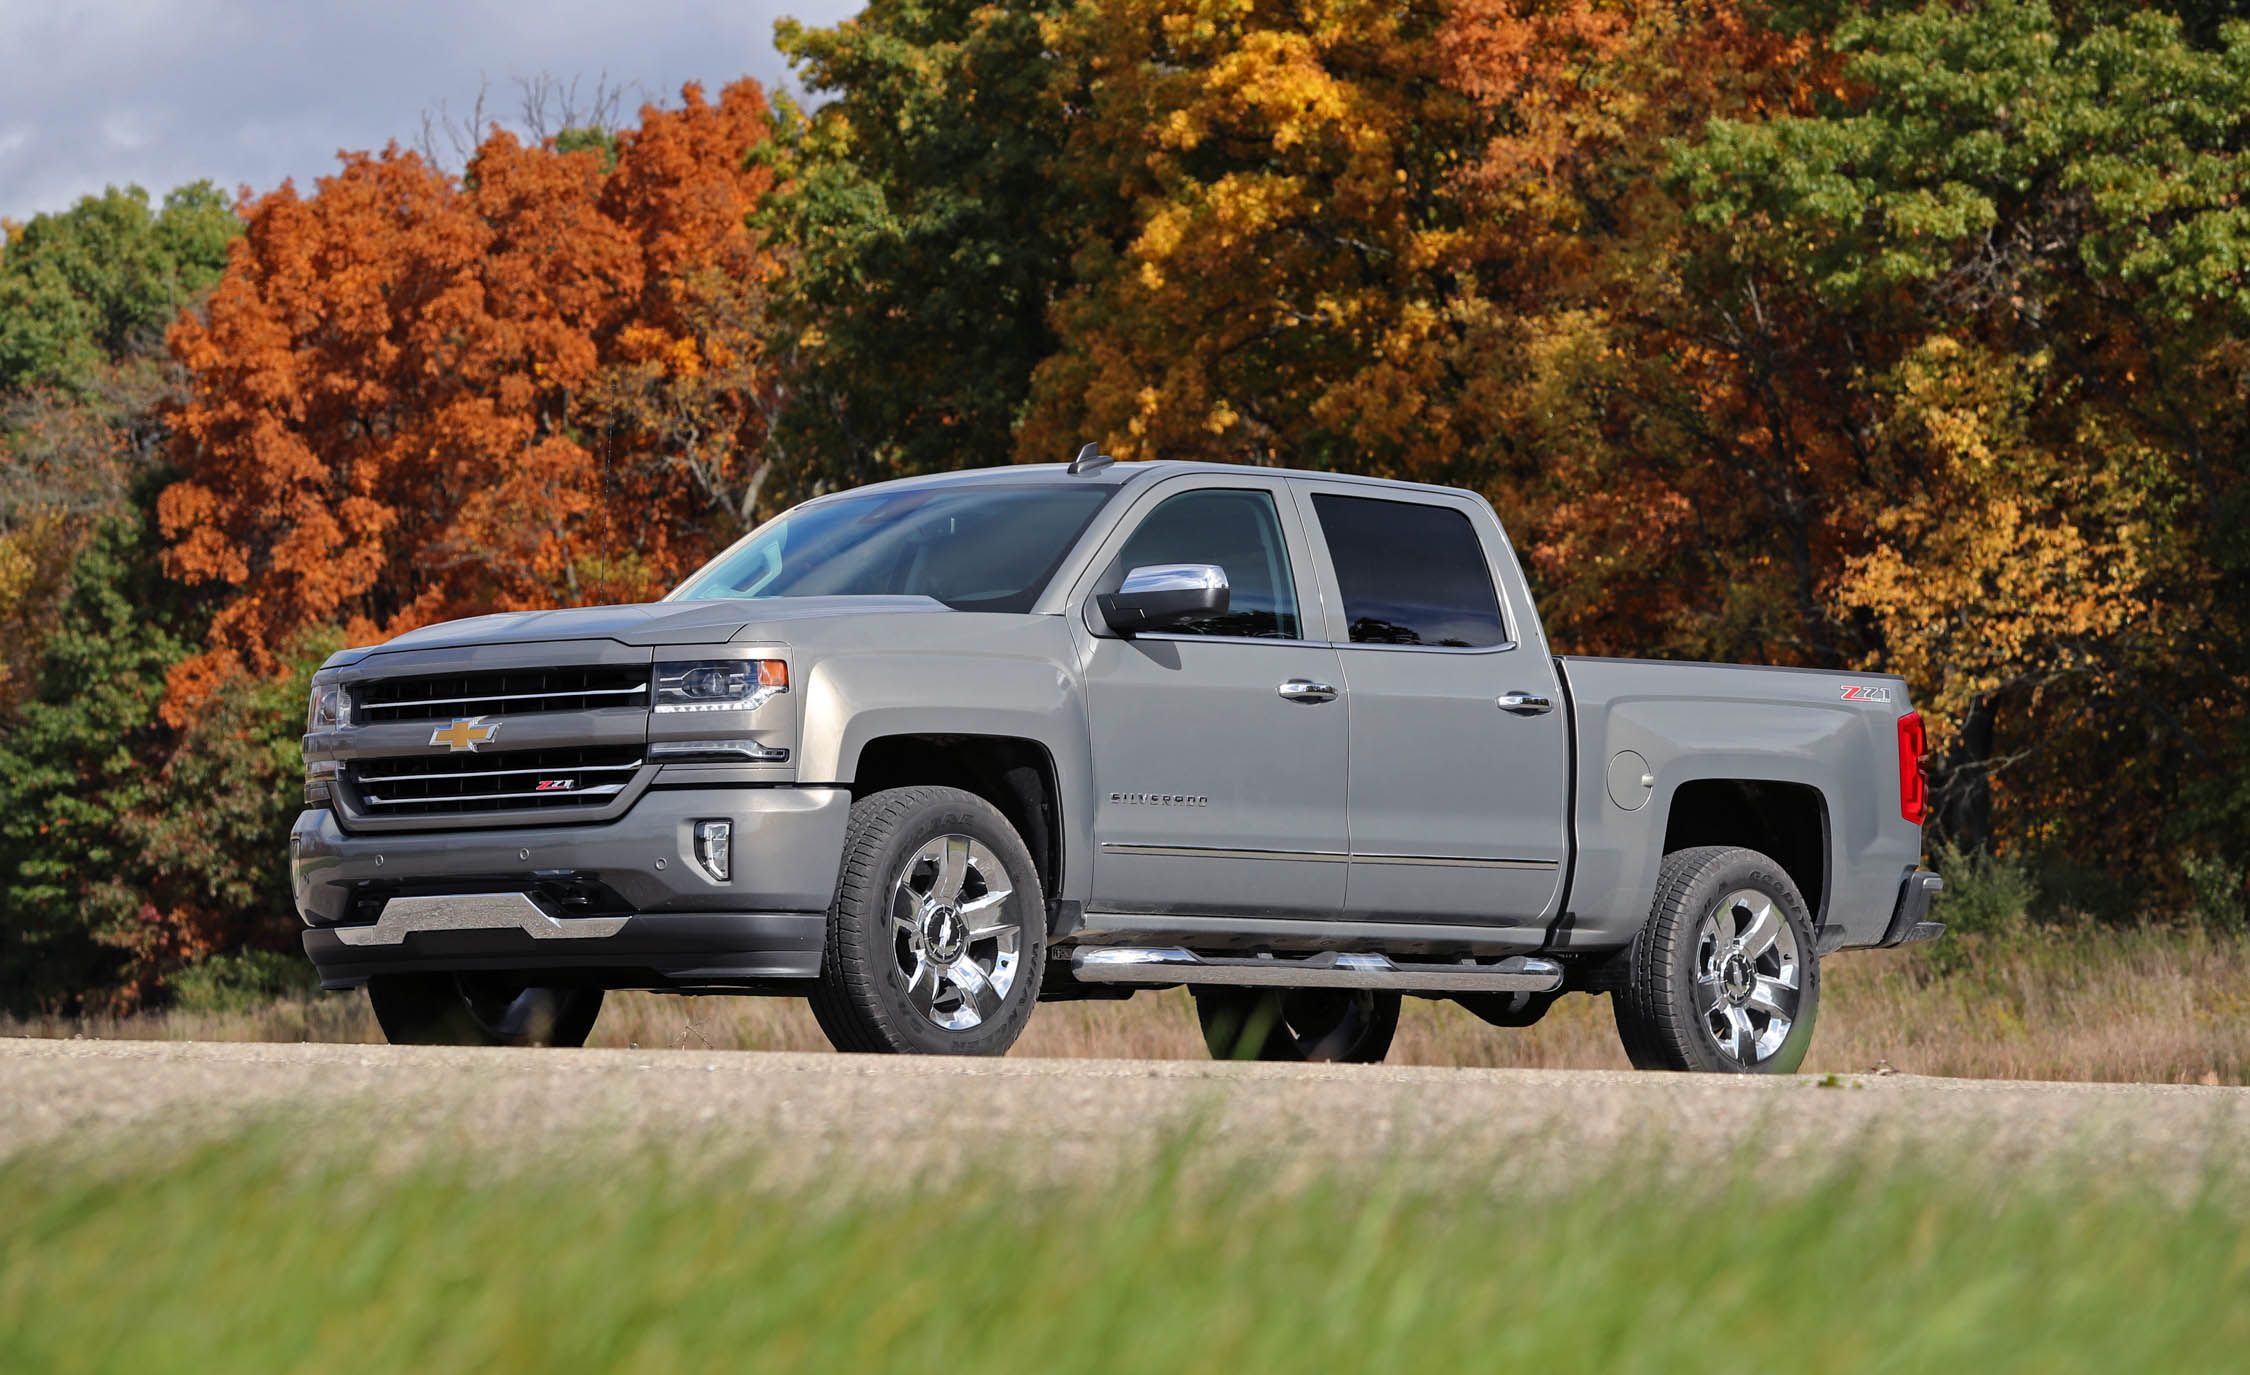 2018 Chevrolet Silverado 1500 | Performance and Driving Impressions ...